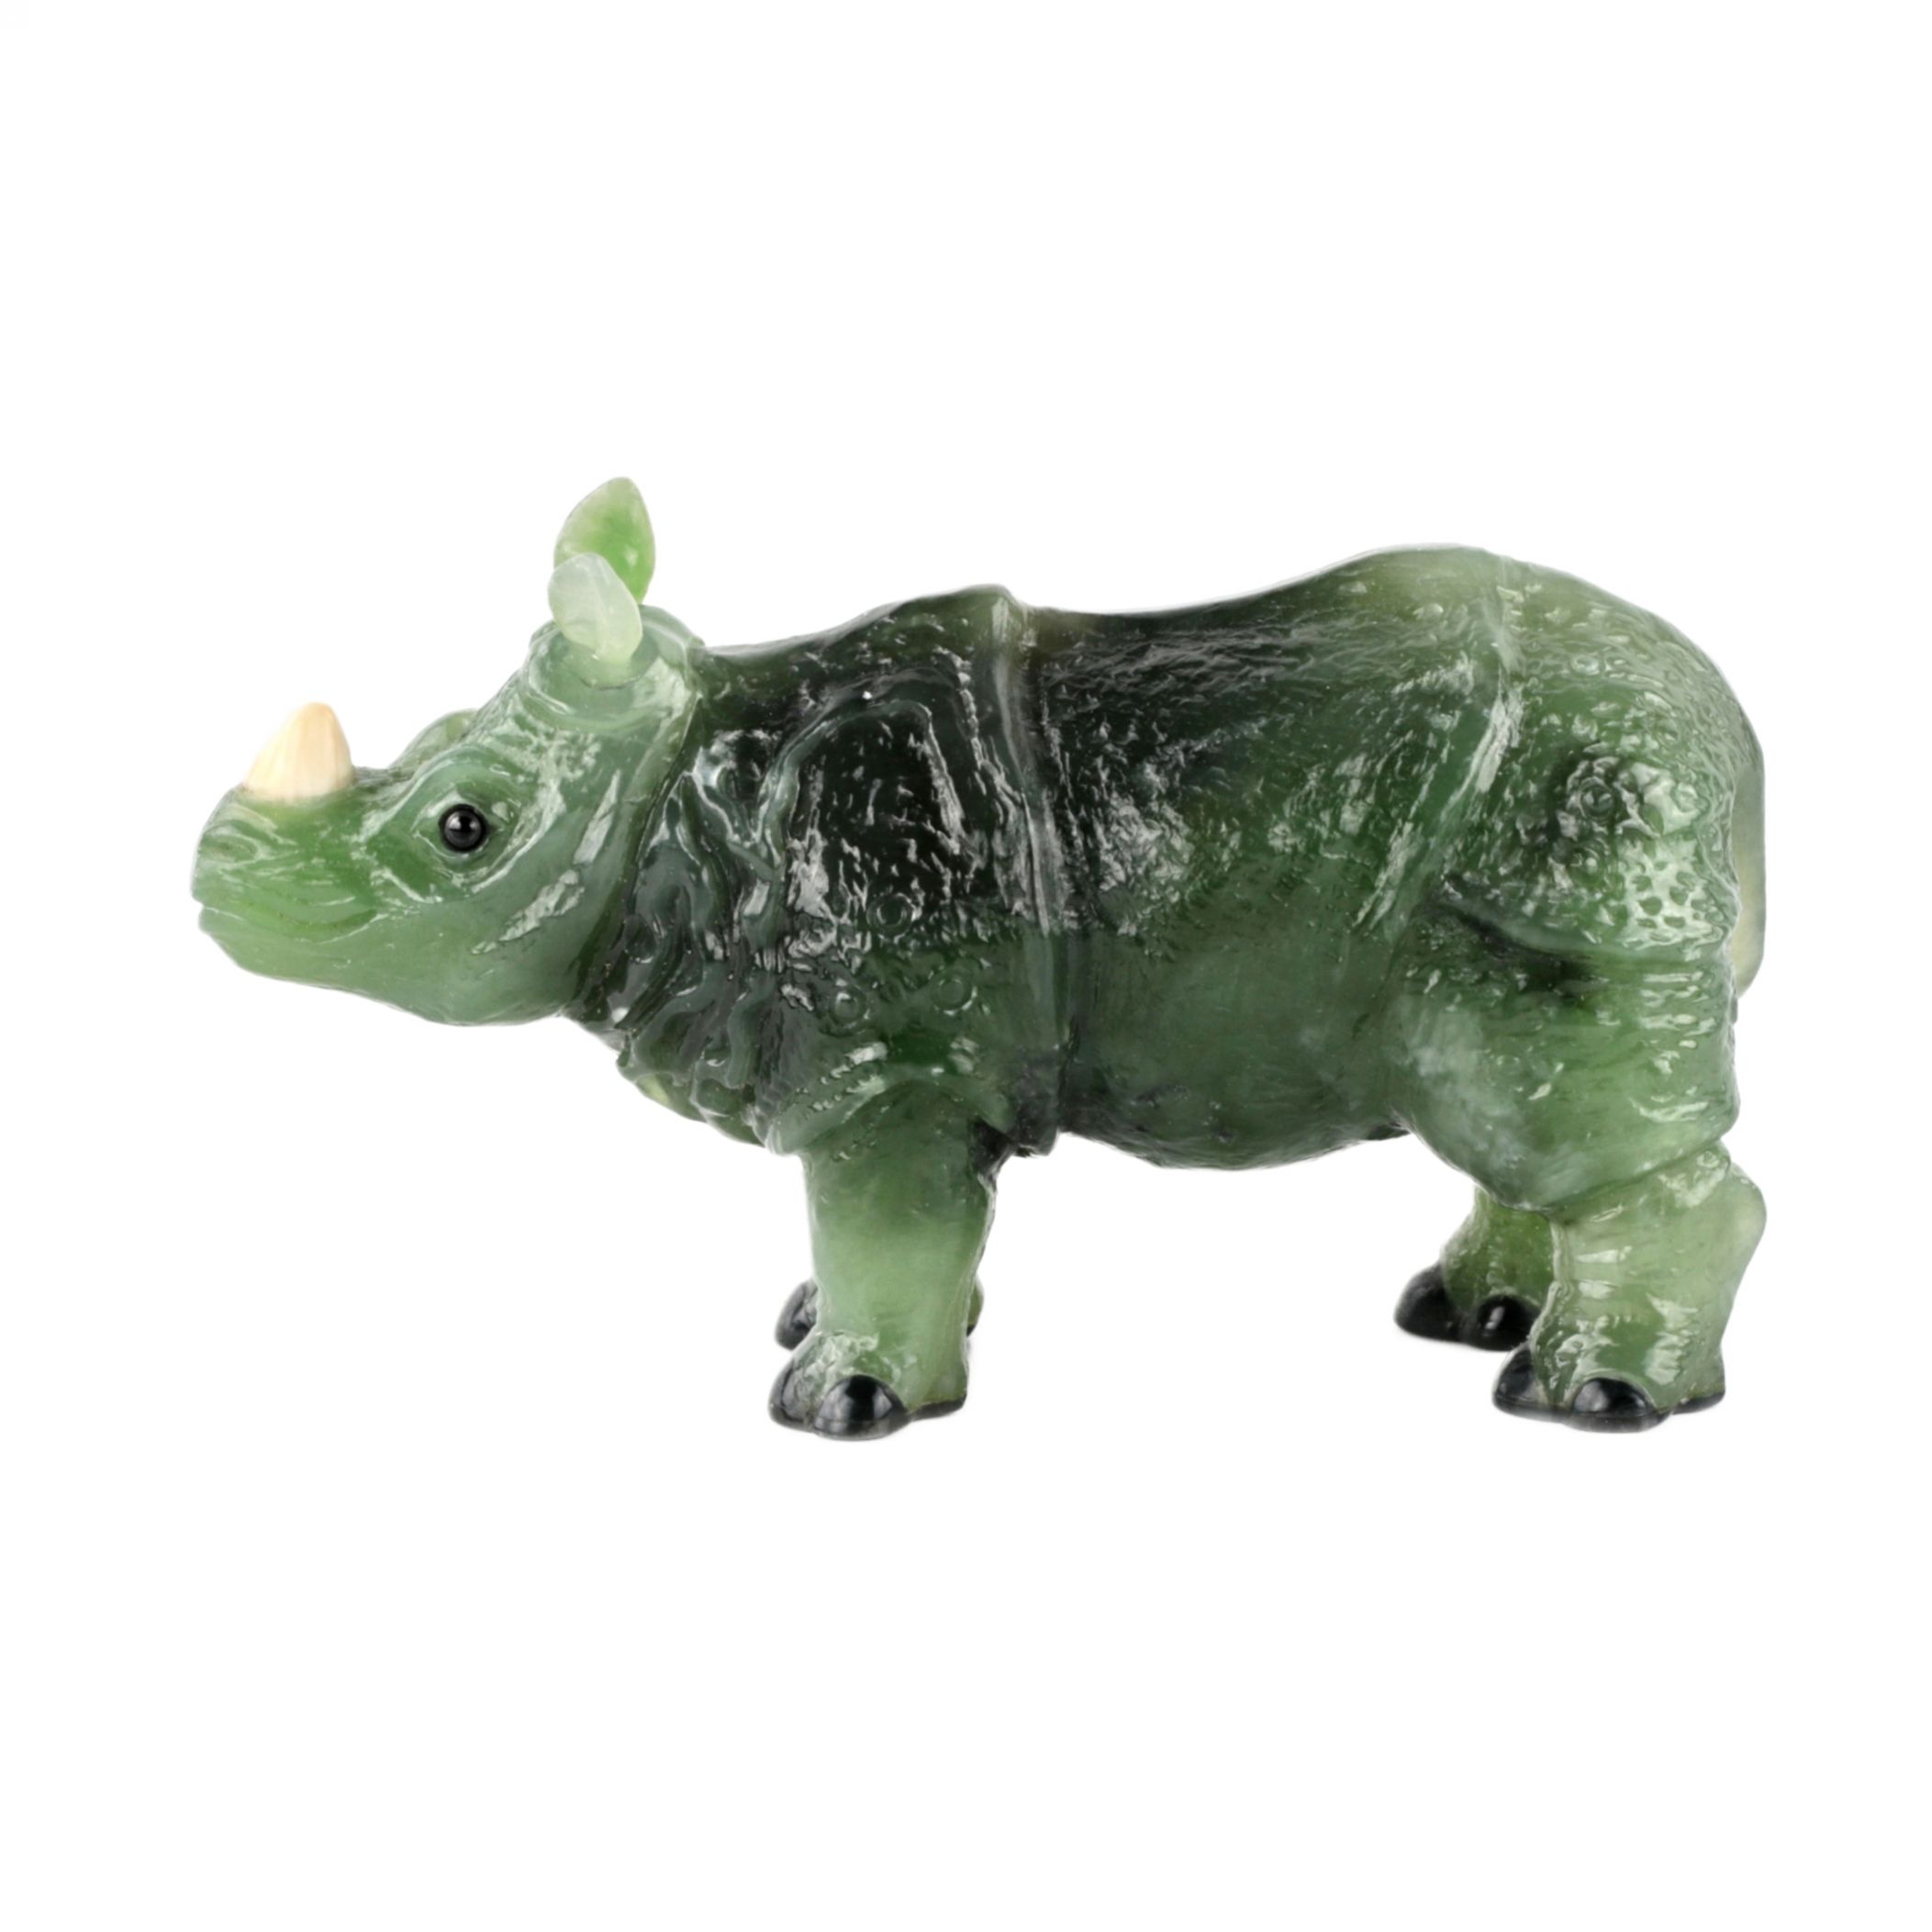 Stone-cutting miniature Jade rhinoceros in the style of products from the Faberge firm - Image 4 of 5